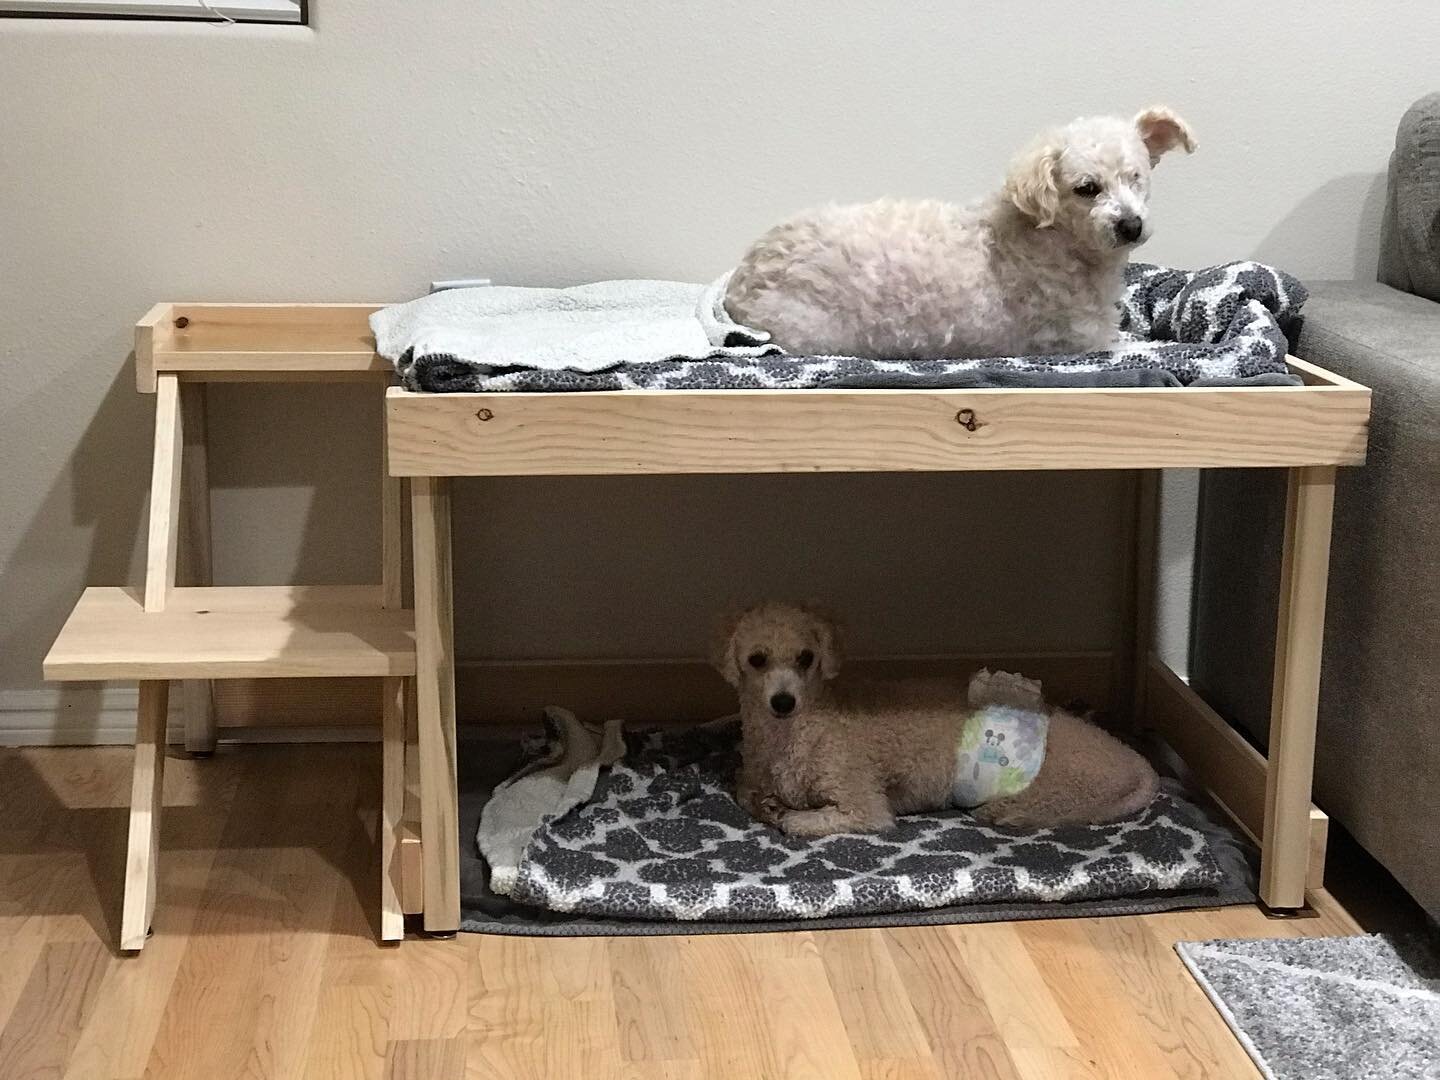 Made a bunk for the dogs!! #bunkbed #dogbed #dogbunkbed #ledesignhb